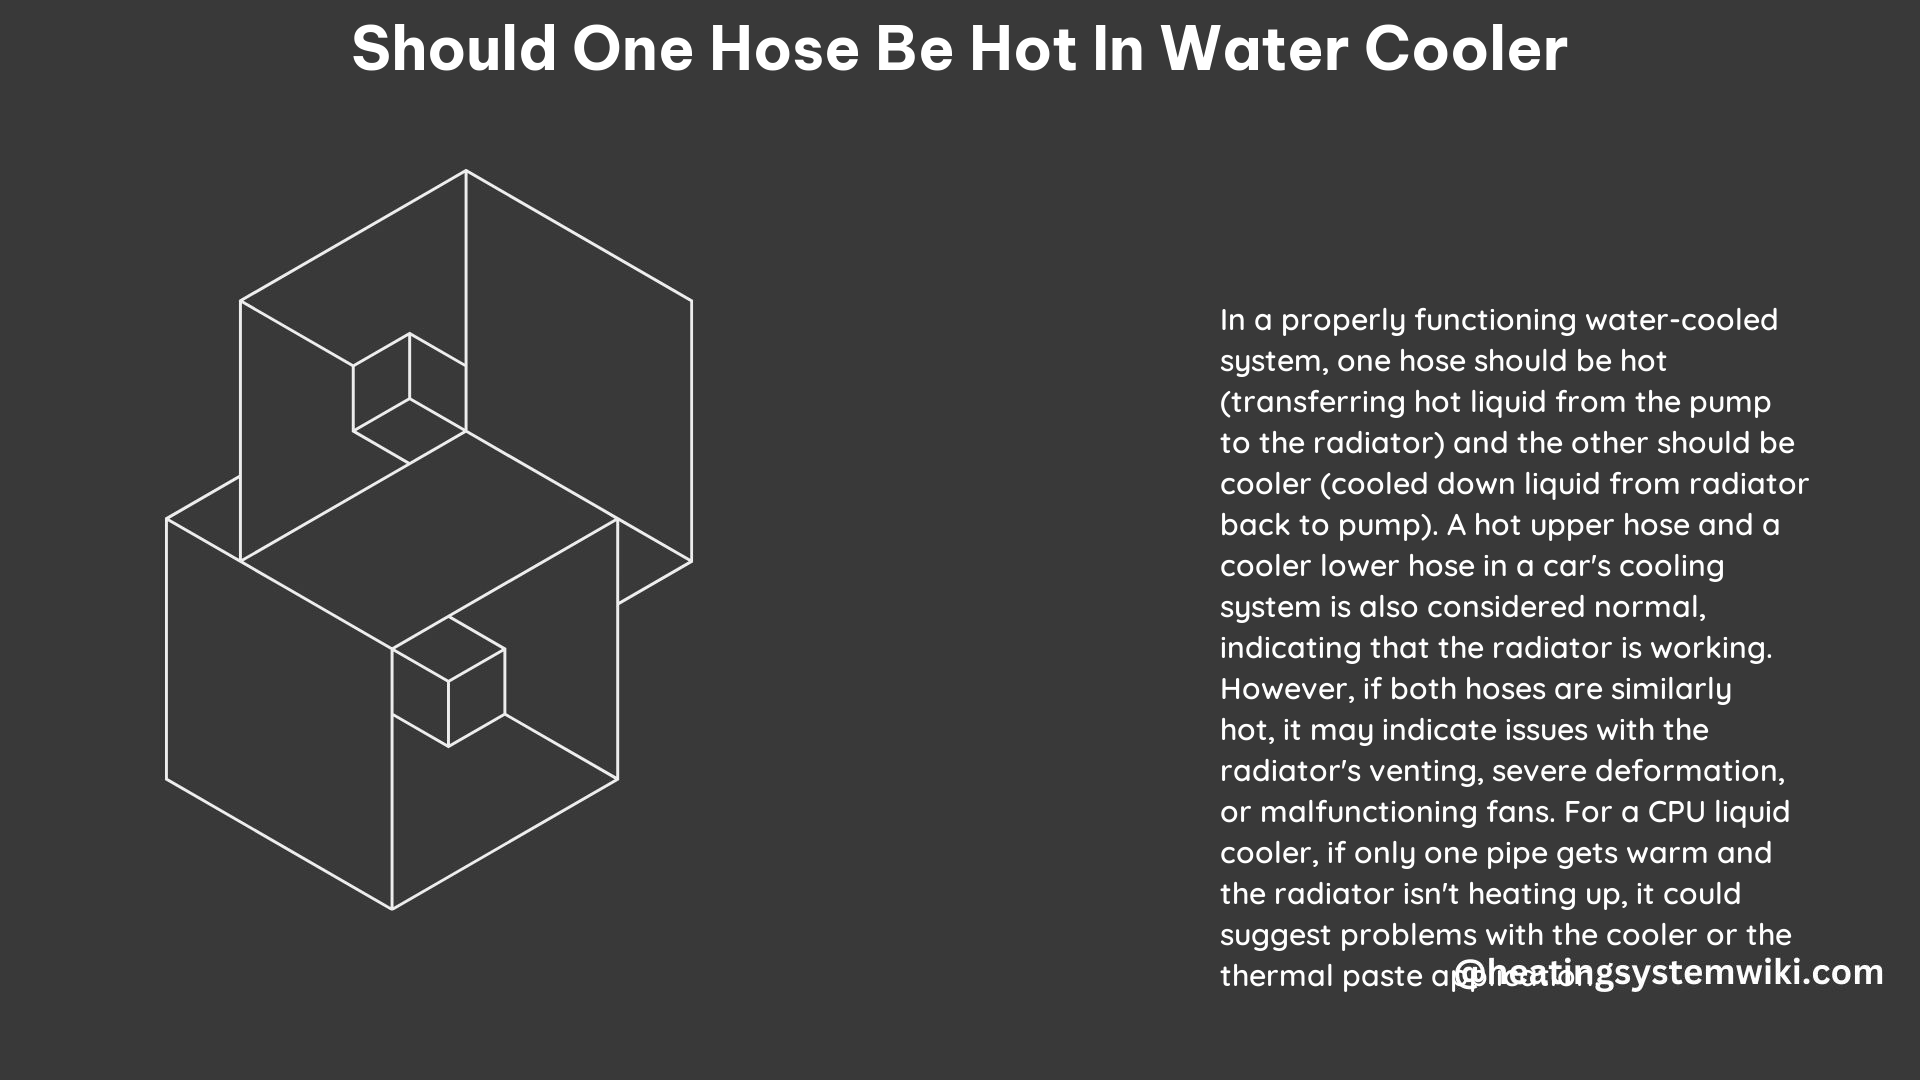 Should One Hose Be Hot in Water Cooler